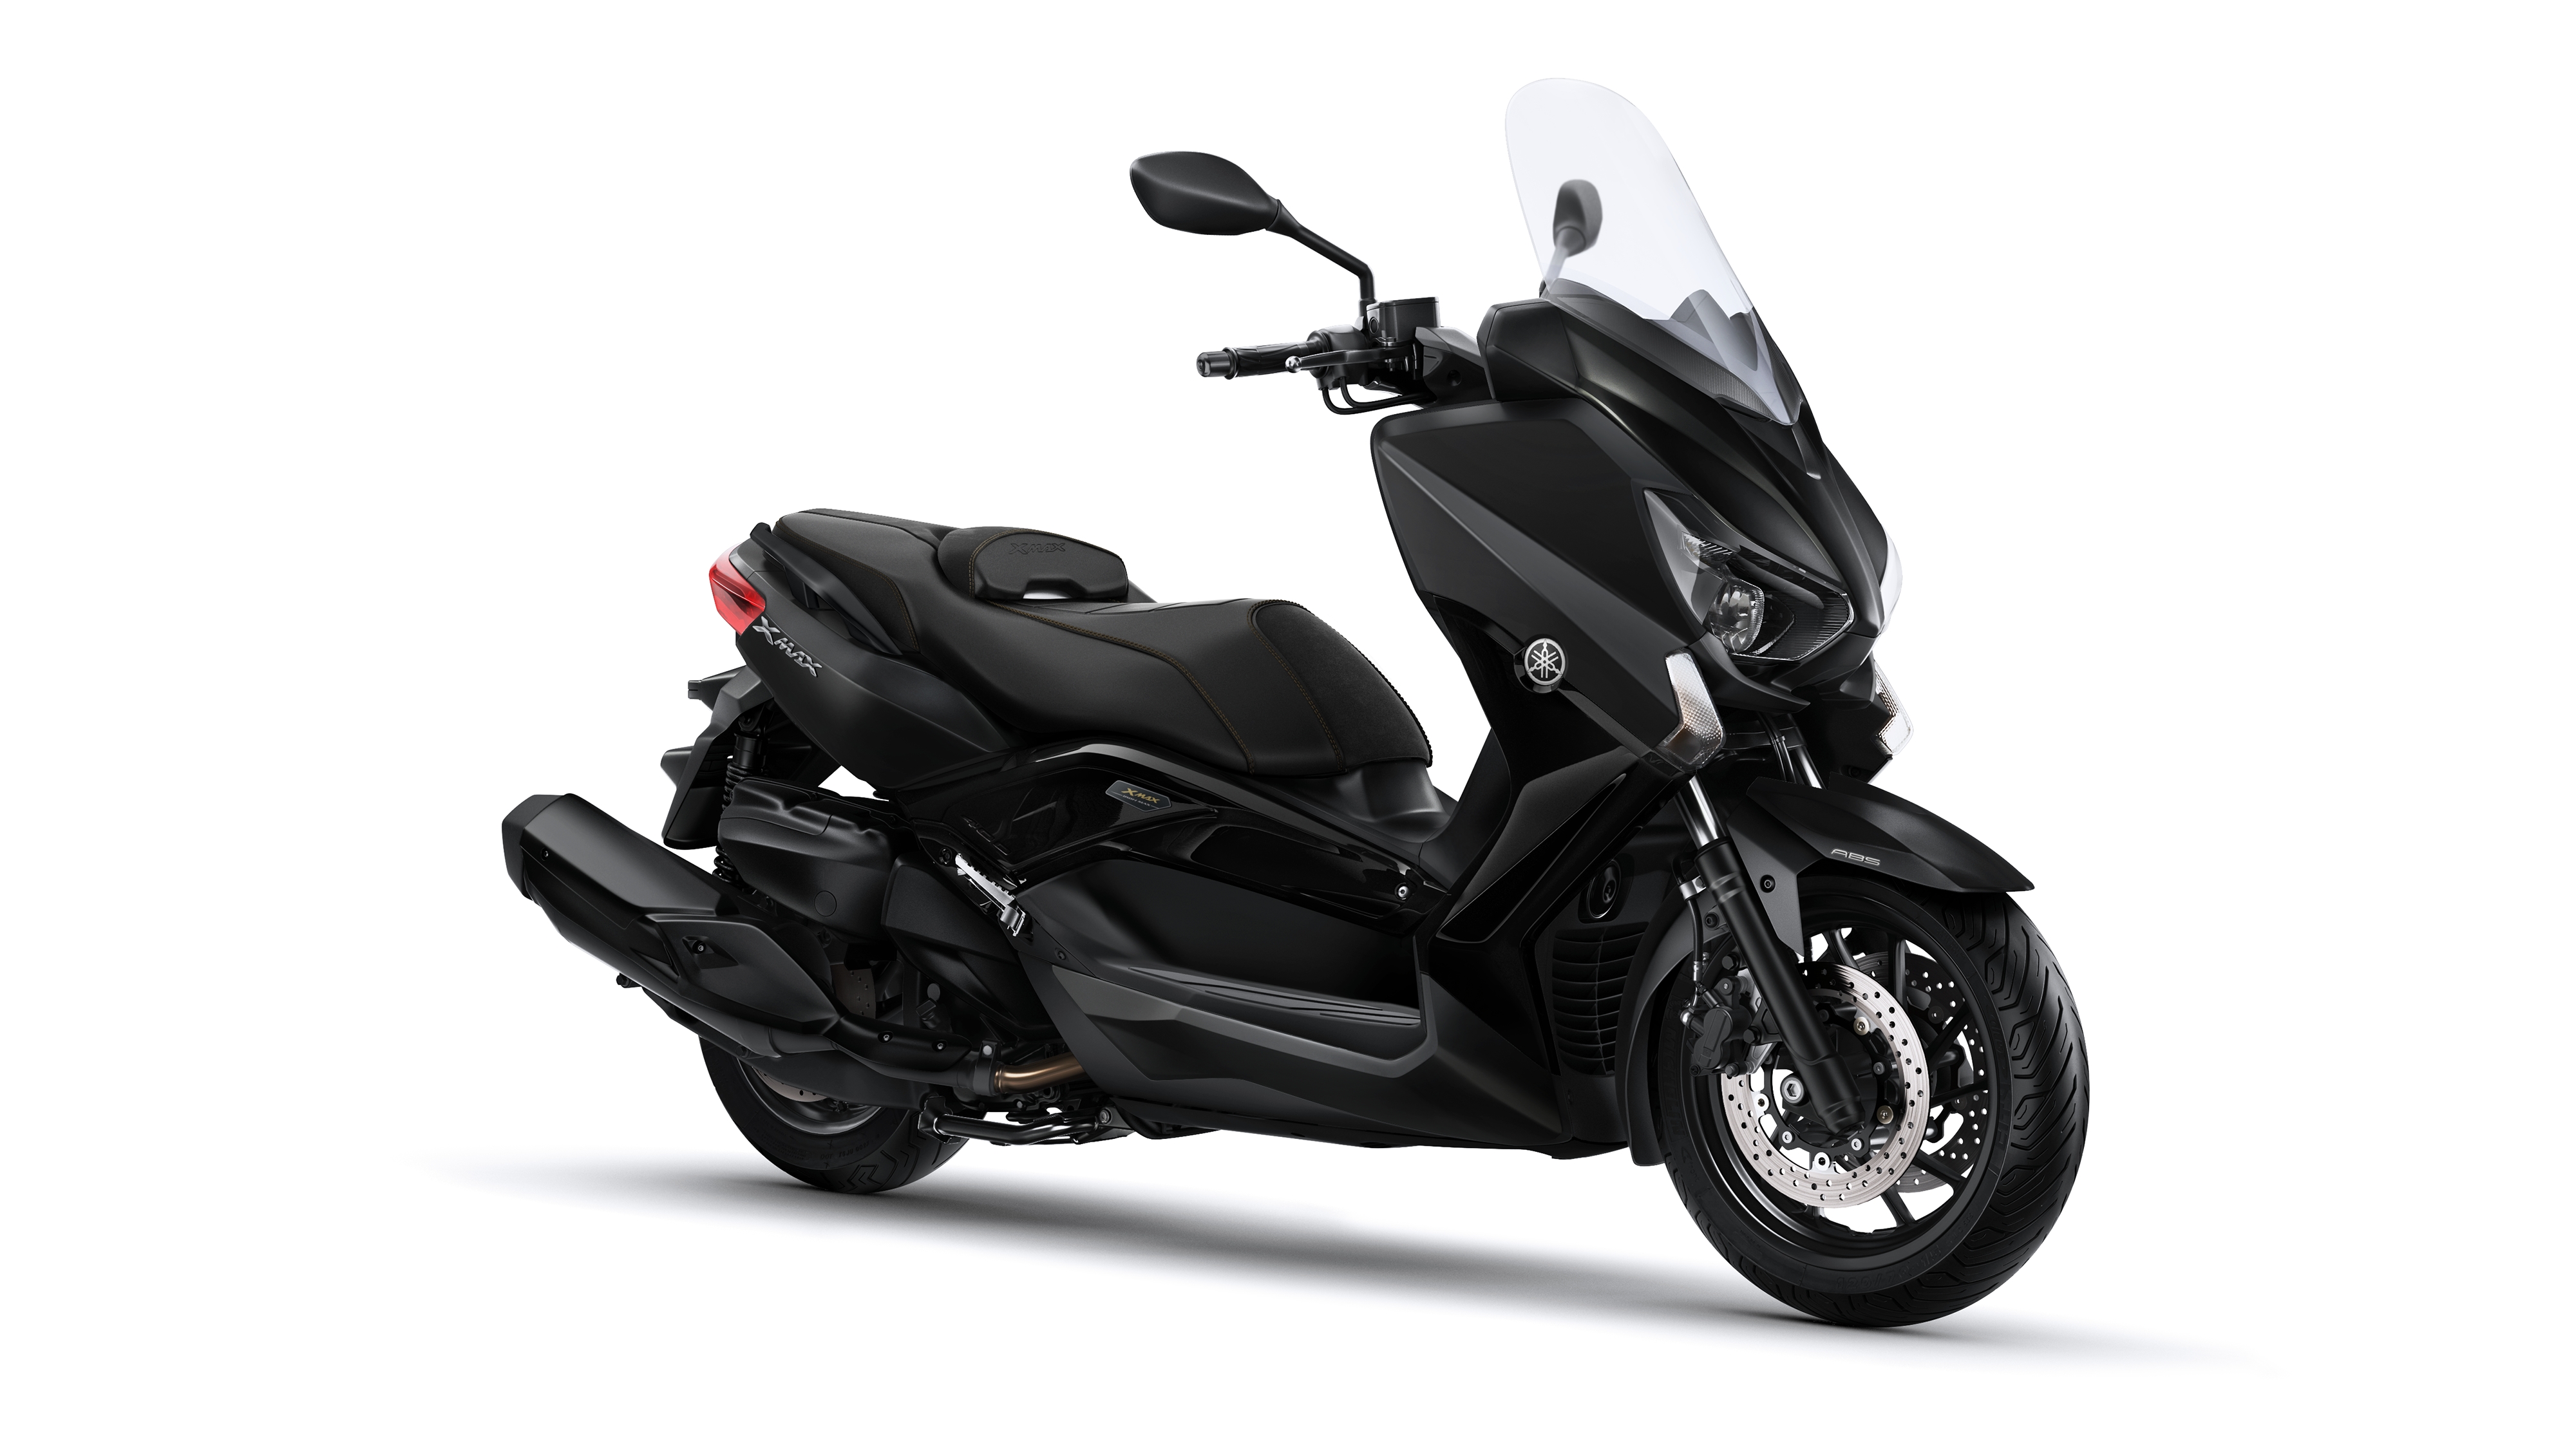 New X-MAX IRON MAX heads Yamaha scooter for Visordown